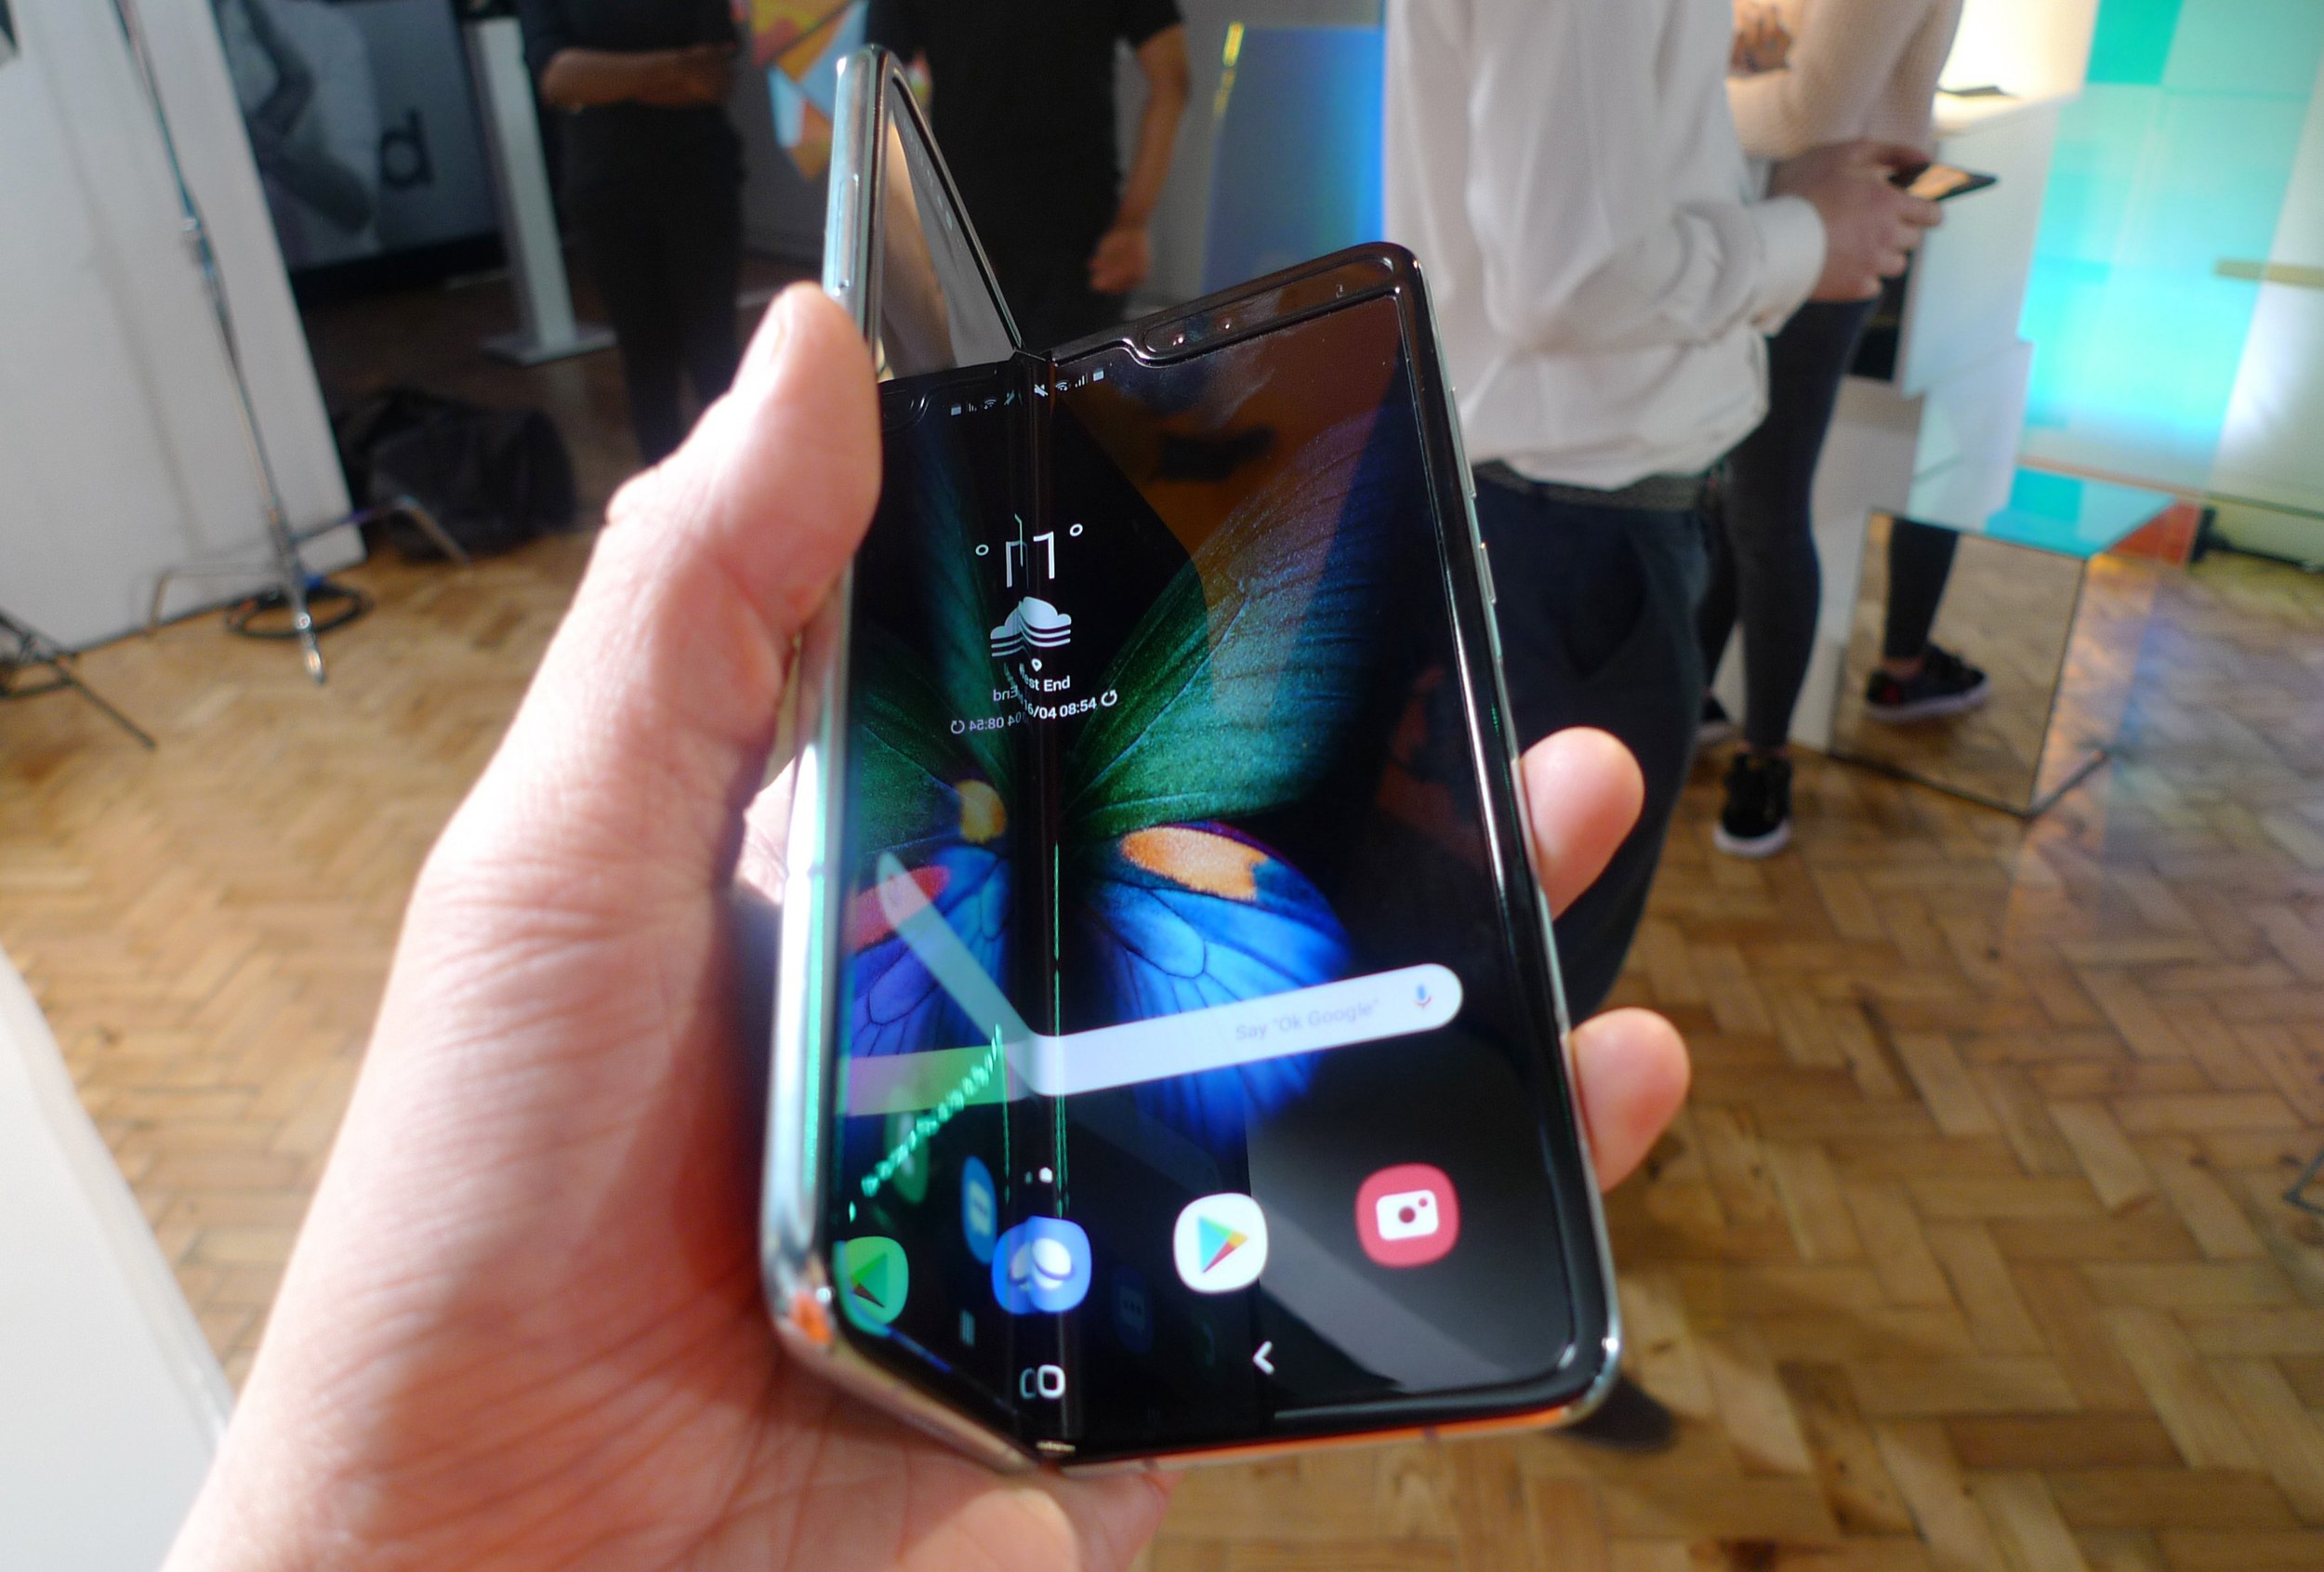 Samsung is allowing people to pre-register for the Galaxy Fold, again